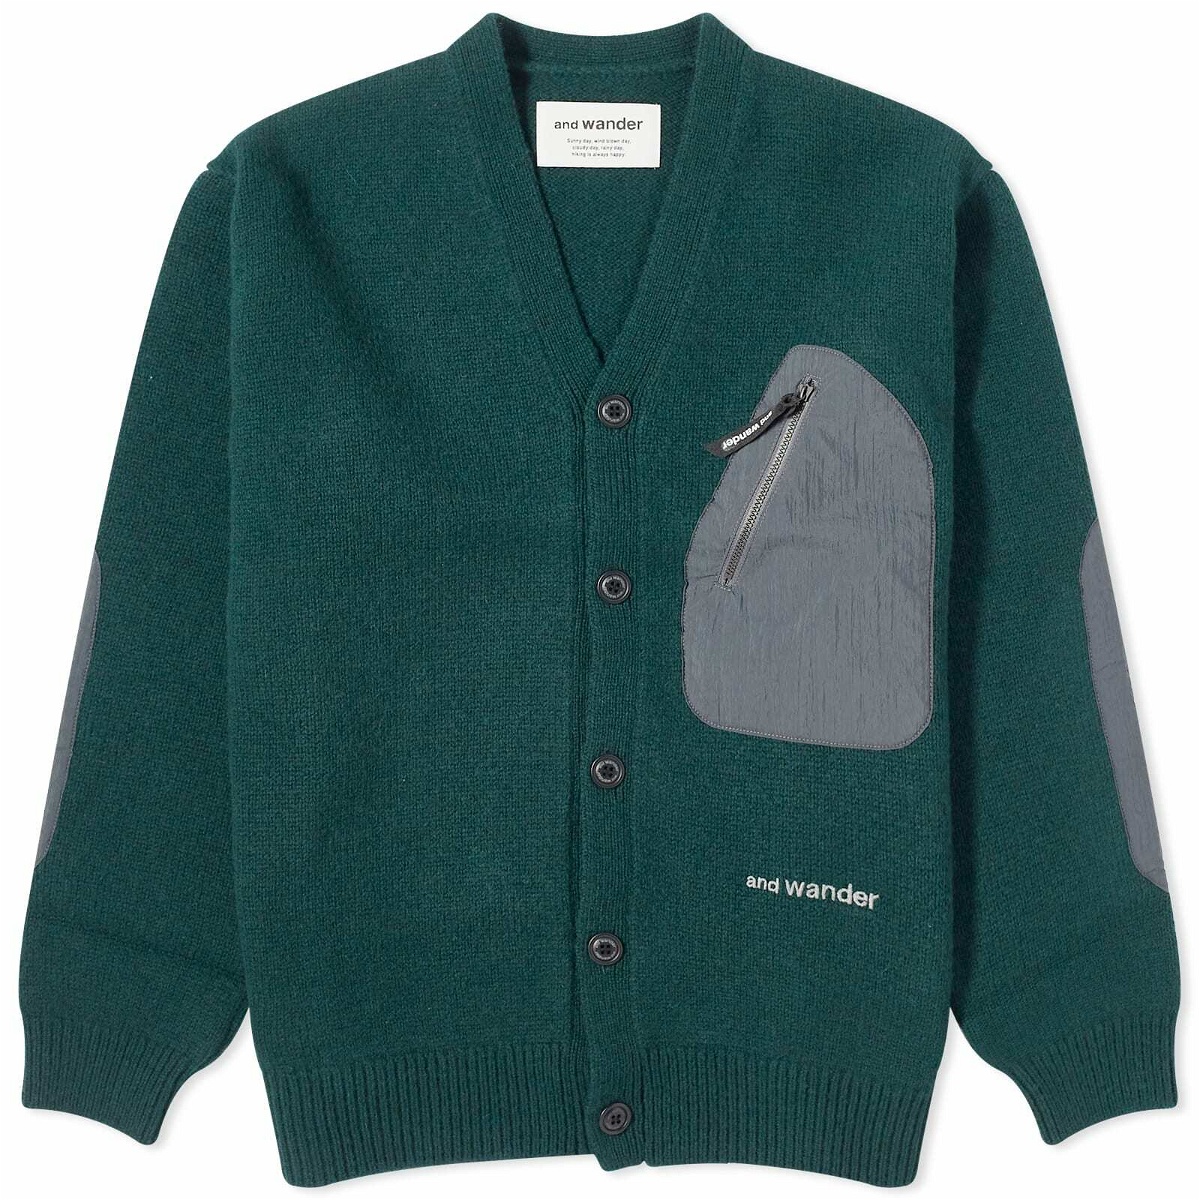 And Wander Men's Shetland Wool Knit Cardigan in Green and Wander